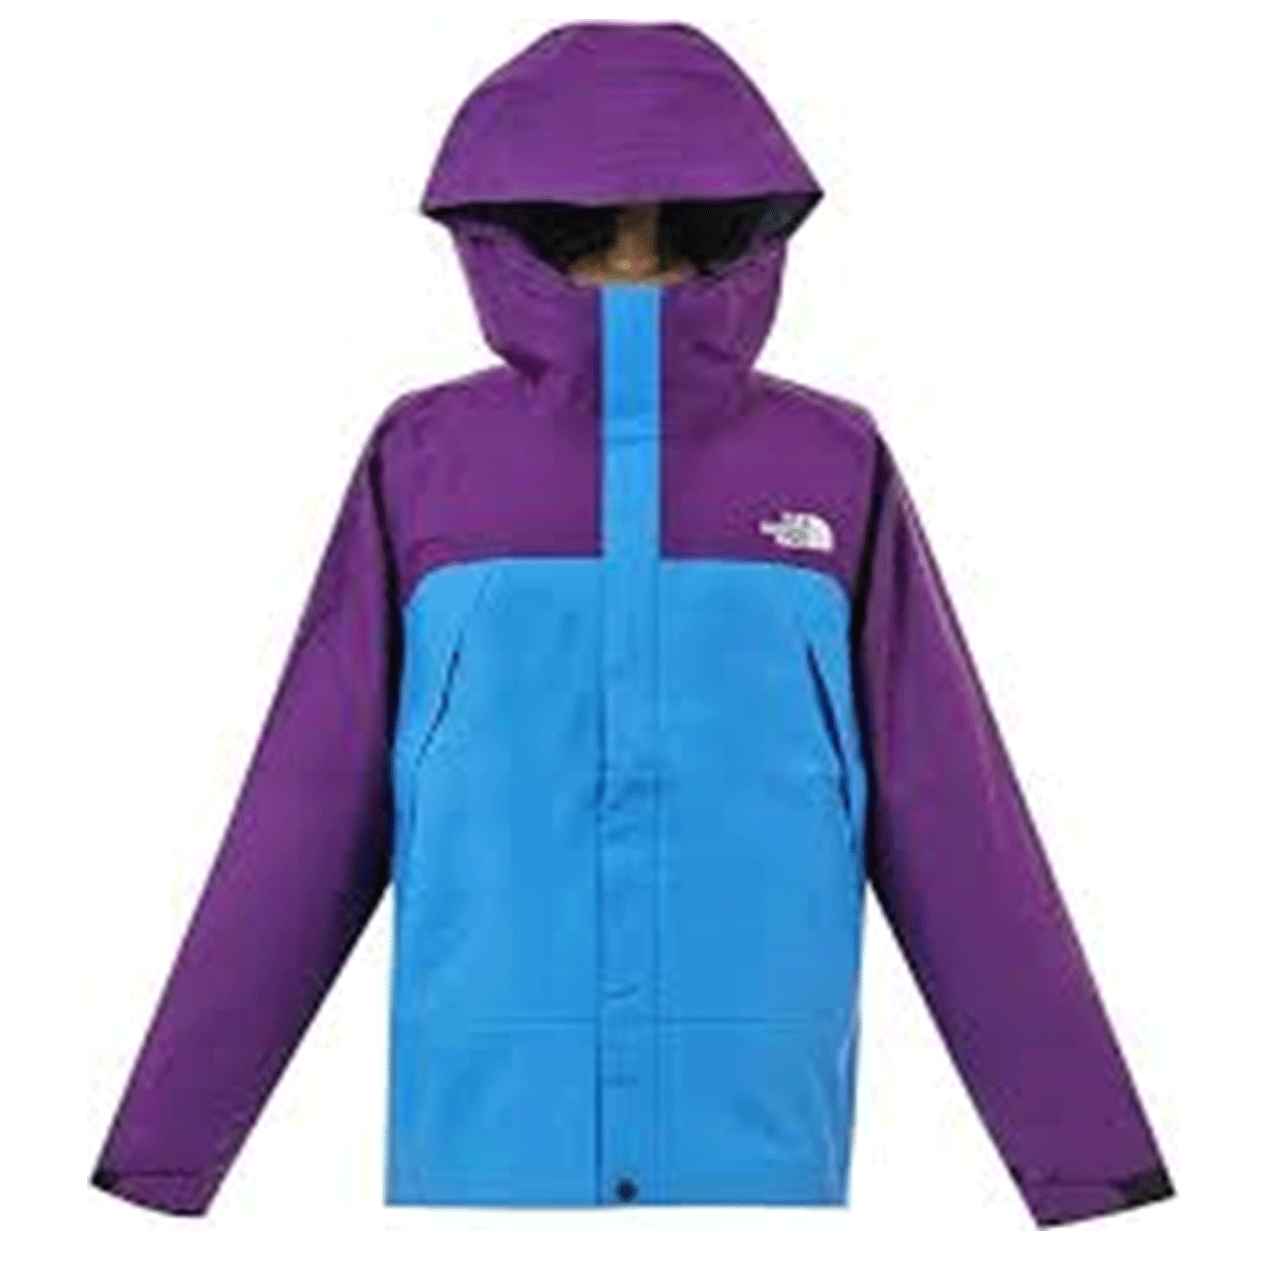 THE NORTH FACE DOT SHOT JACKET BLUE/PURPLE TNF-0A2Y1I-514